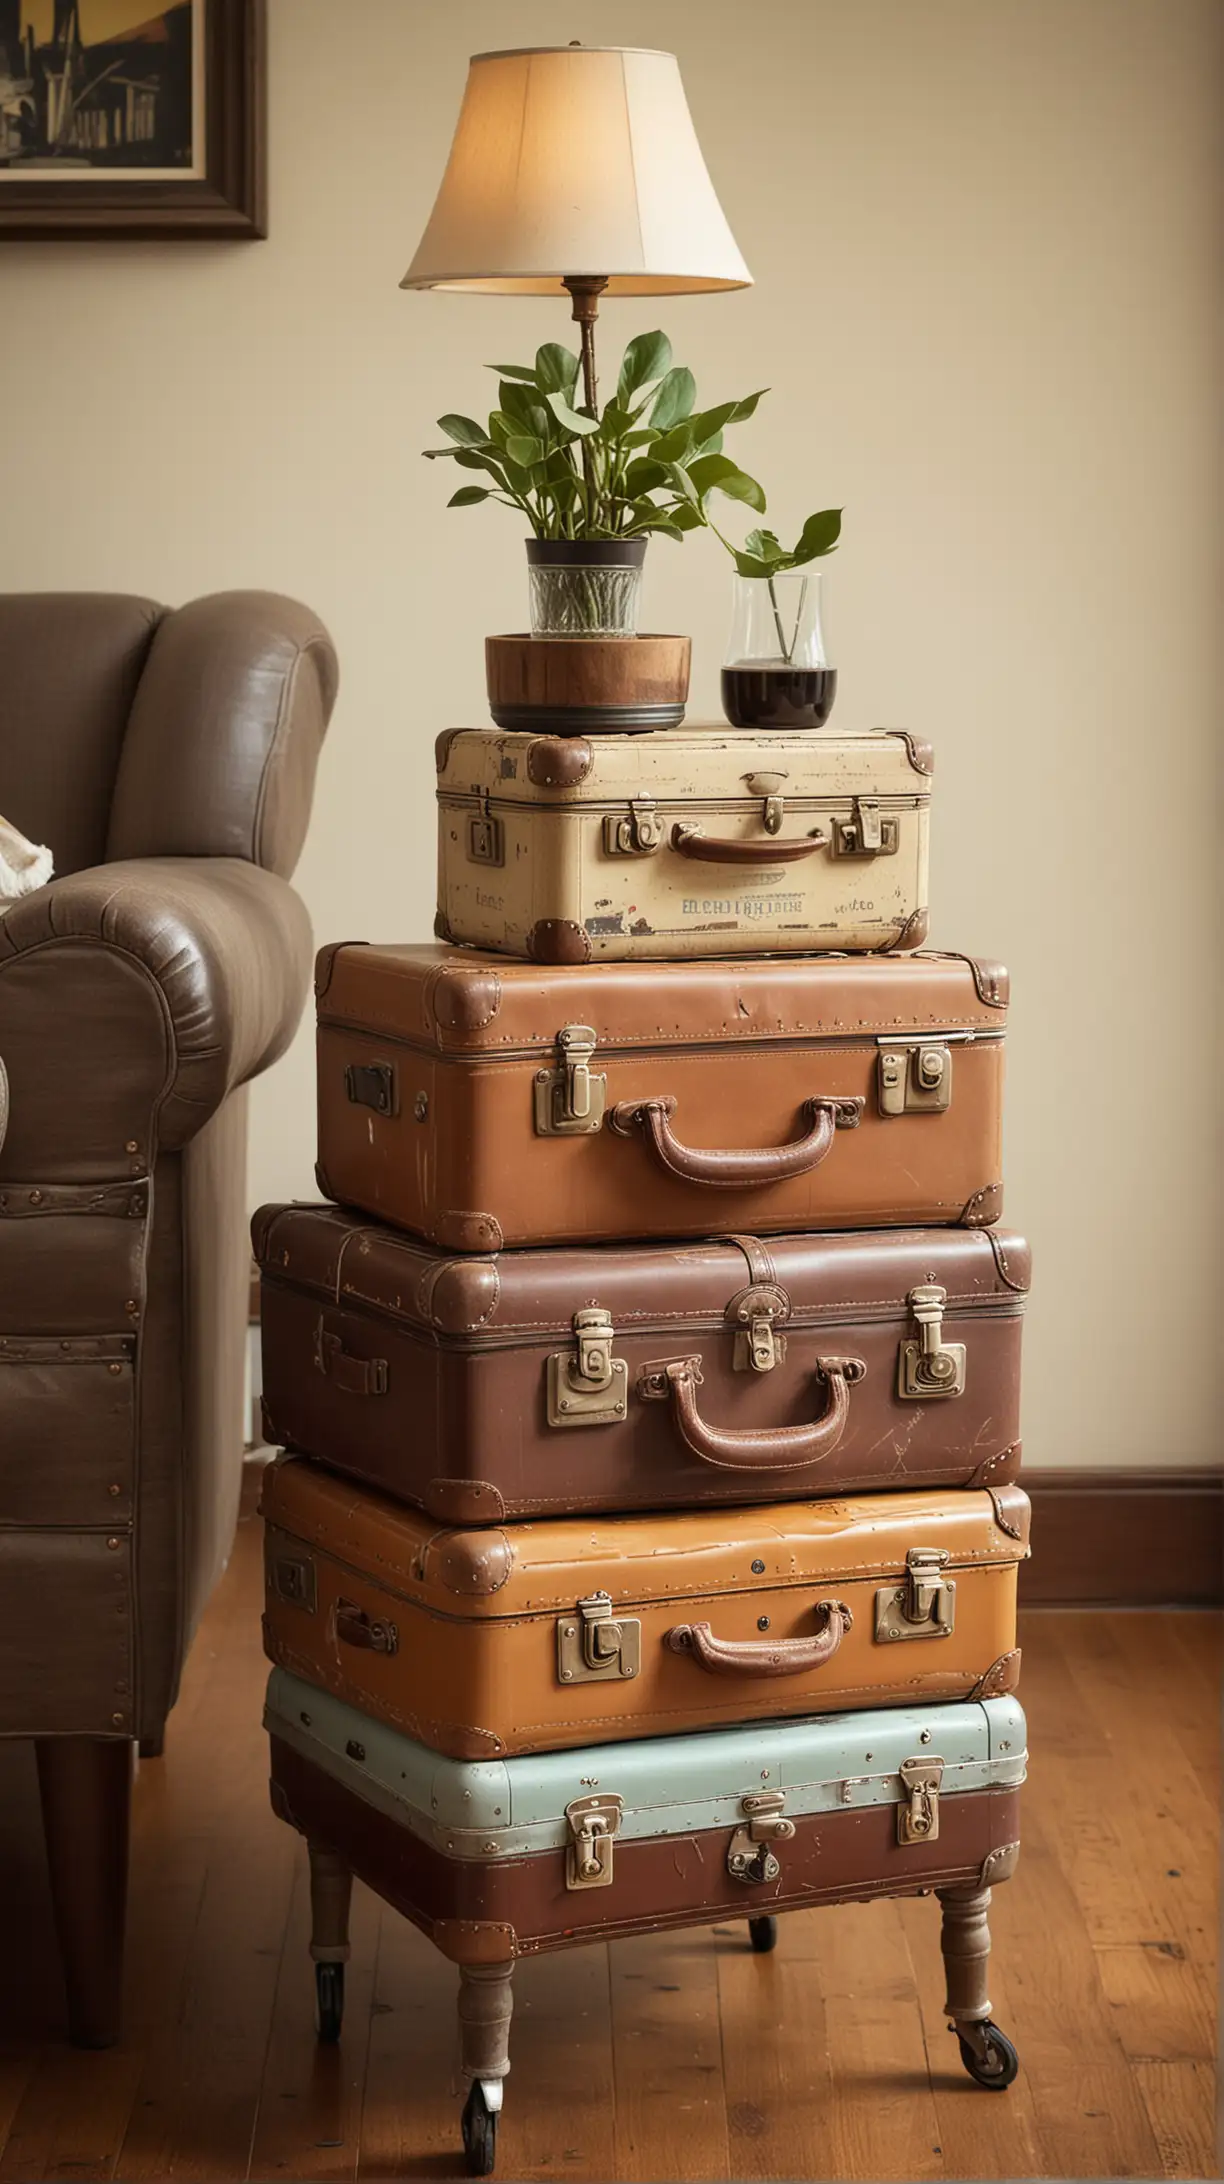 Innovative side table made from a stack of vintage suitcases, adding a functional and stylish element to a vintage living room setup.